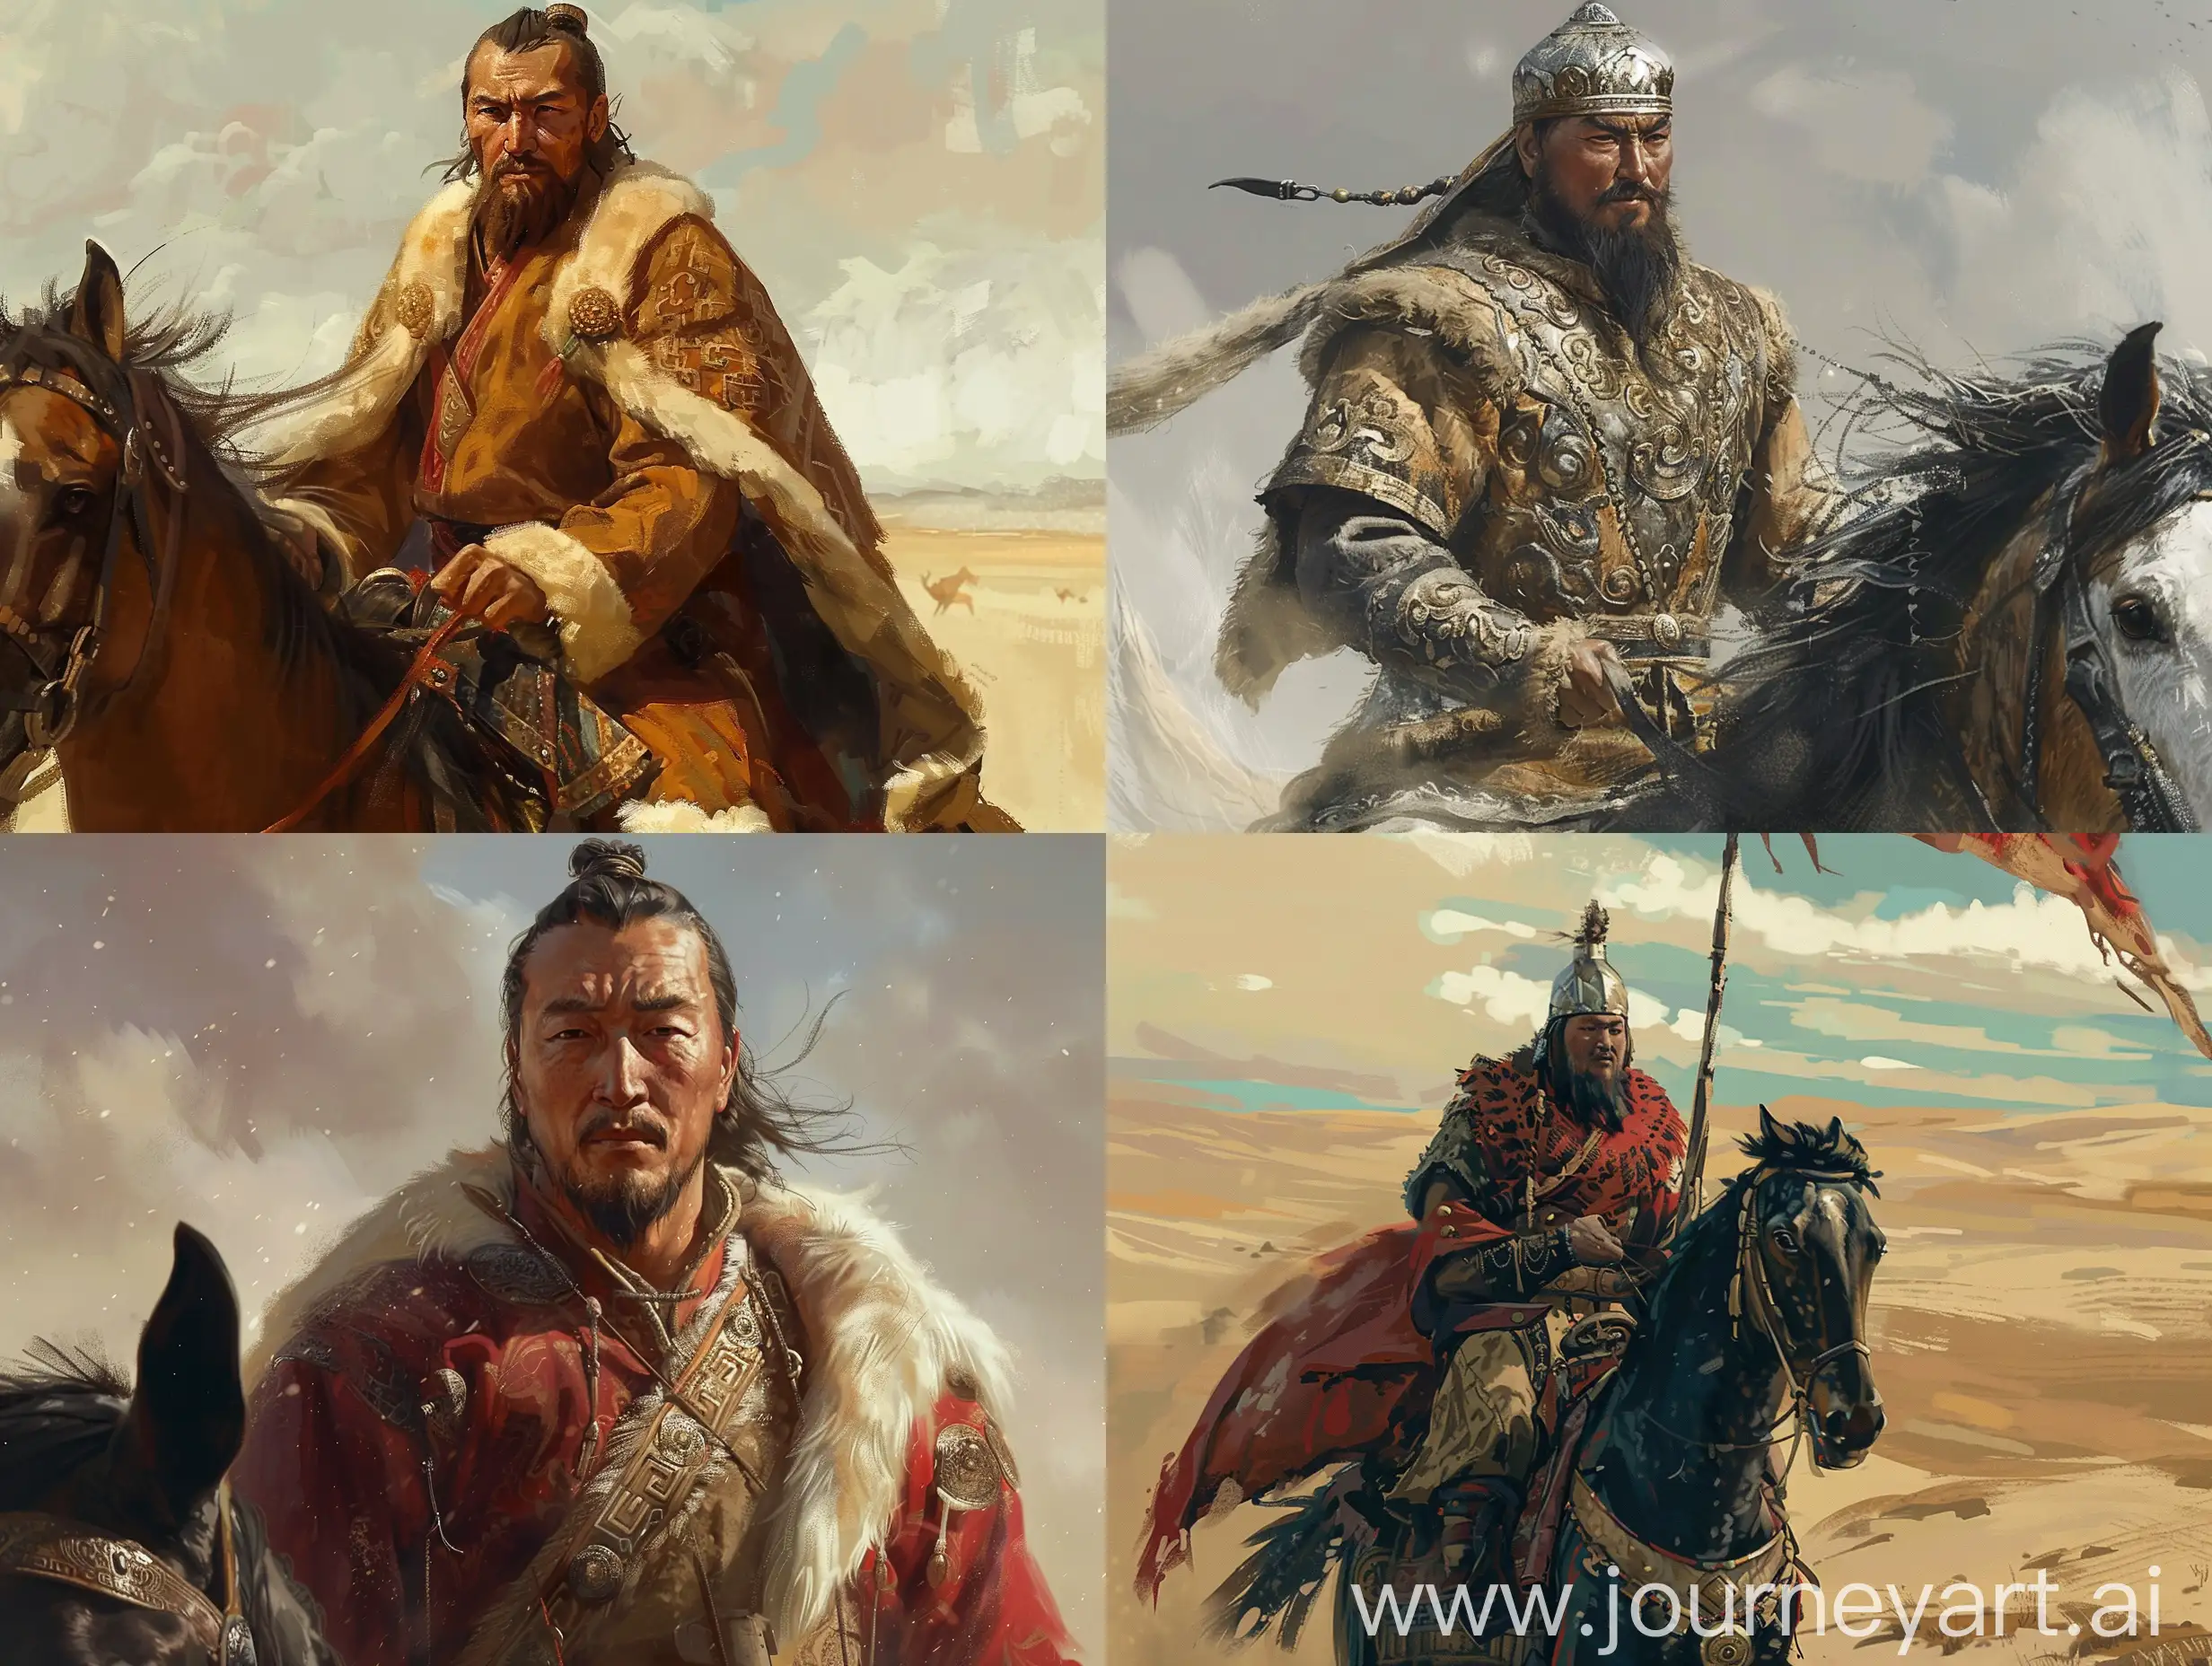 Tumanay Khan appears as an enigmatic figure in the dusty pages of history, like the harsh winds of the Mongolian steppes. As a khan ruling over the vast plains of the Mongolian Plateau at the crossroads of the eleventh and twelfth centuries, his life is hidden between the lines of an epic story. An 11th century Mongol Khan.